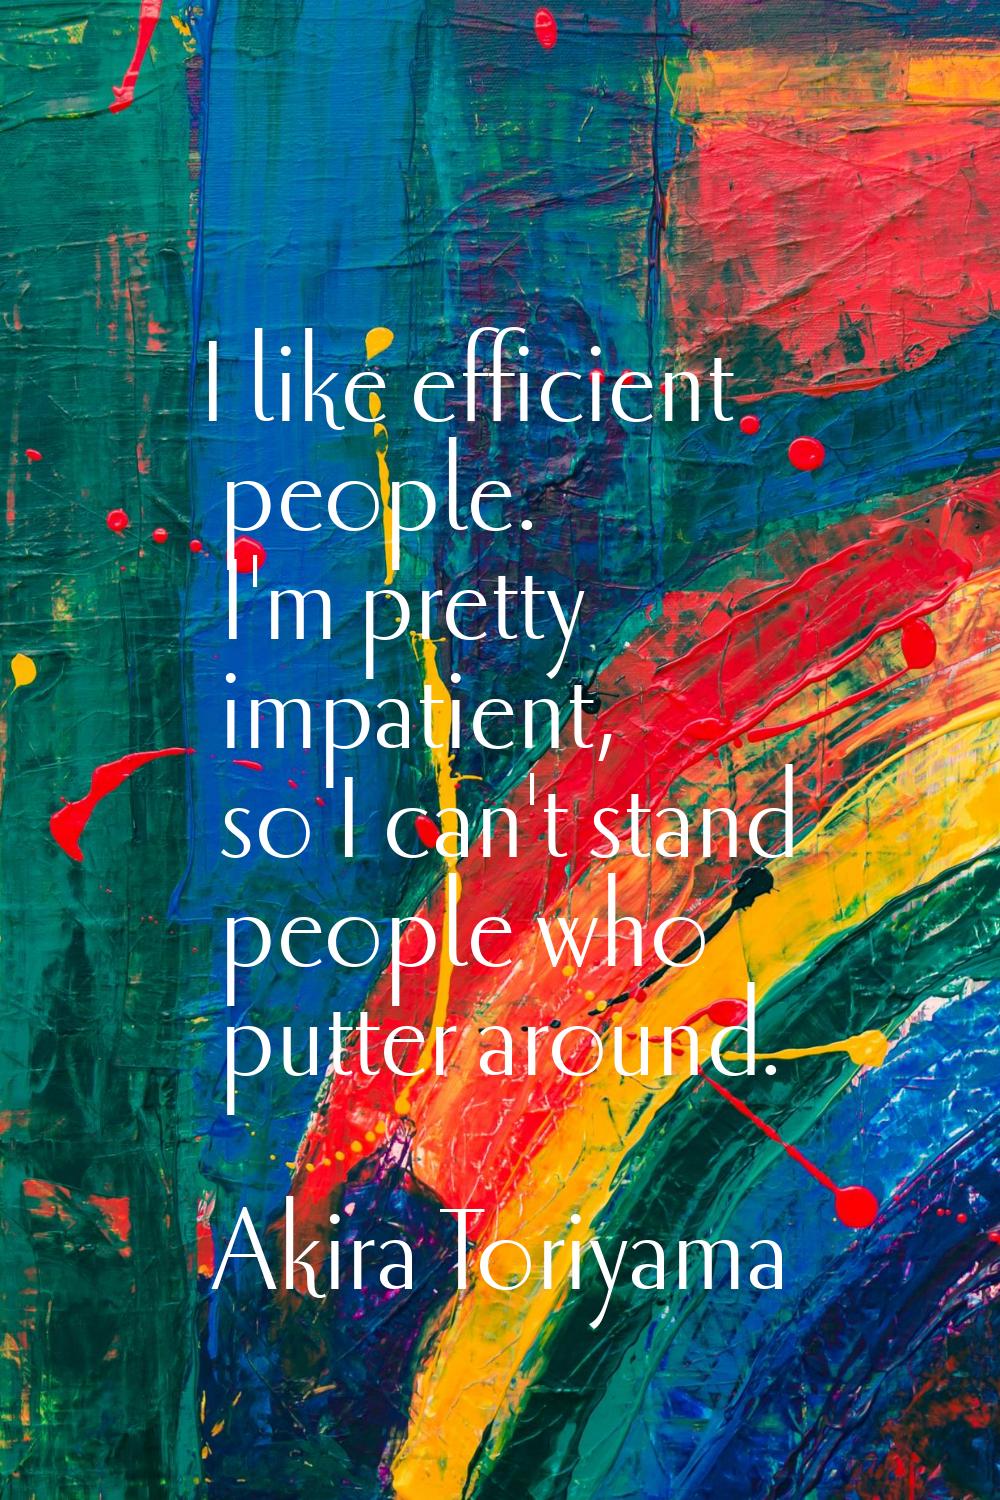 I like efficient people. I'm pretty impatient, so I can't stand people who putter around.